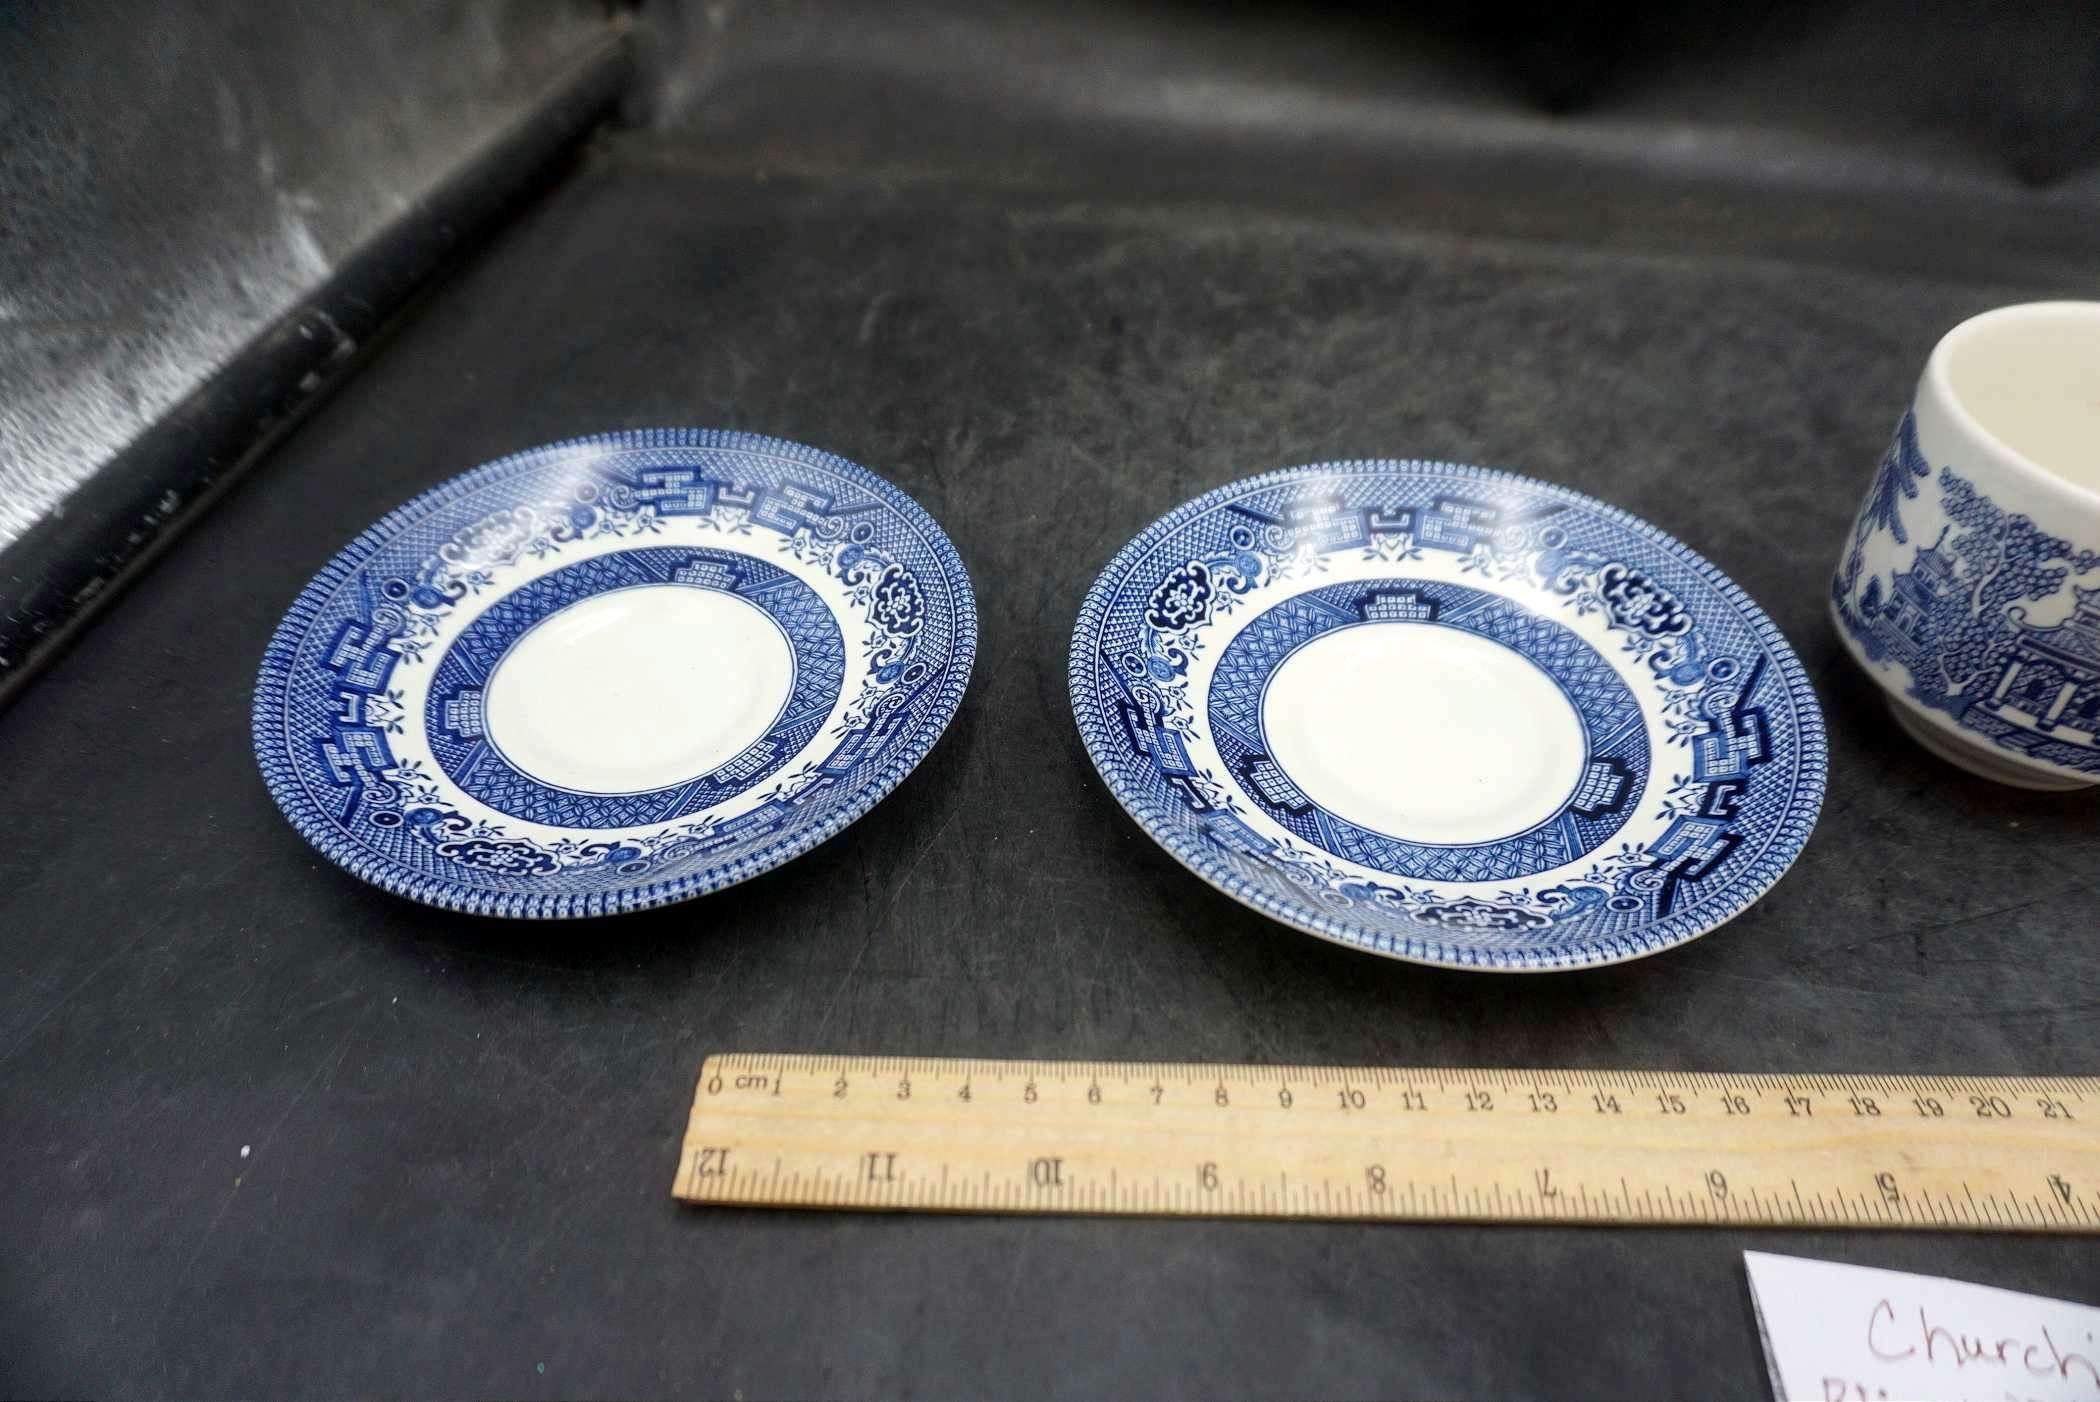 Churchill England Blue Willow Cups & Saucers